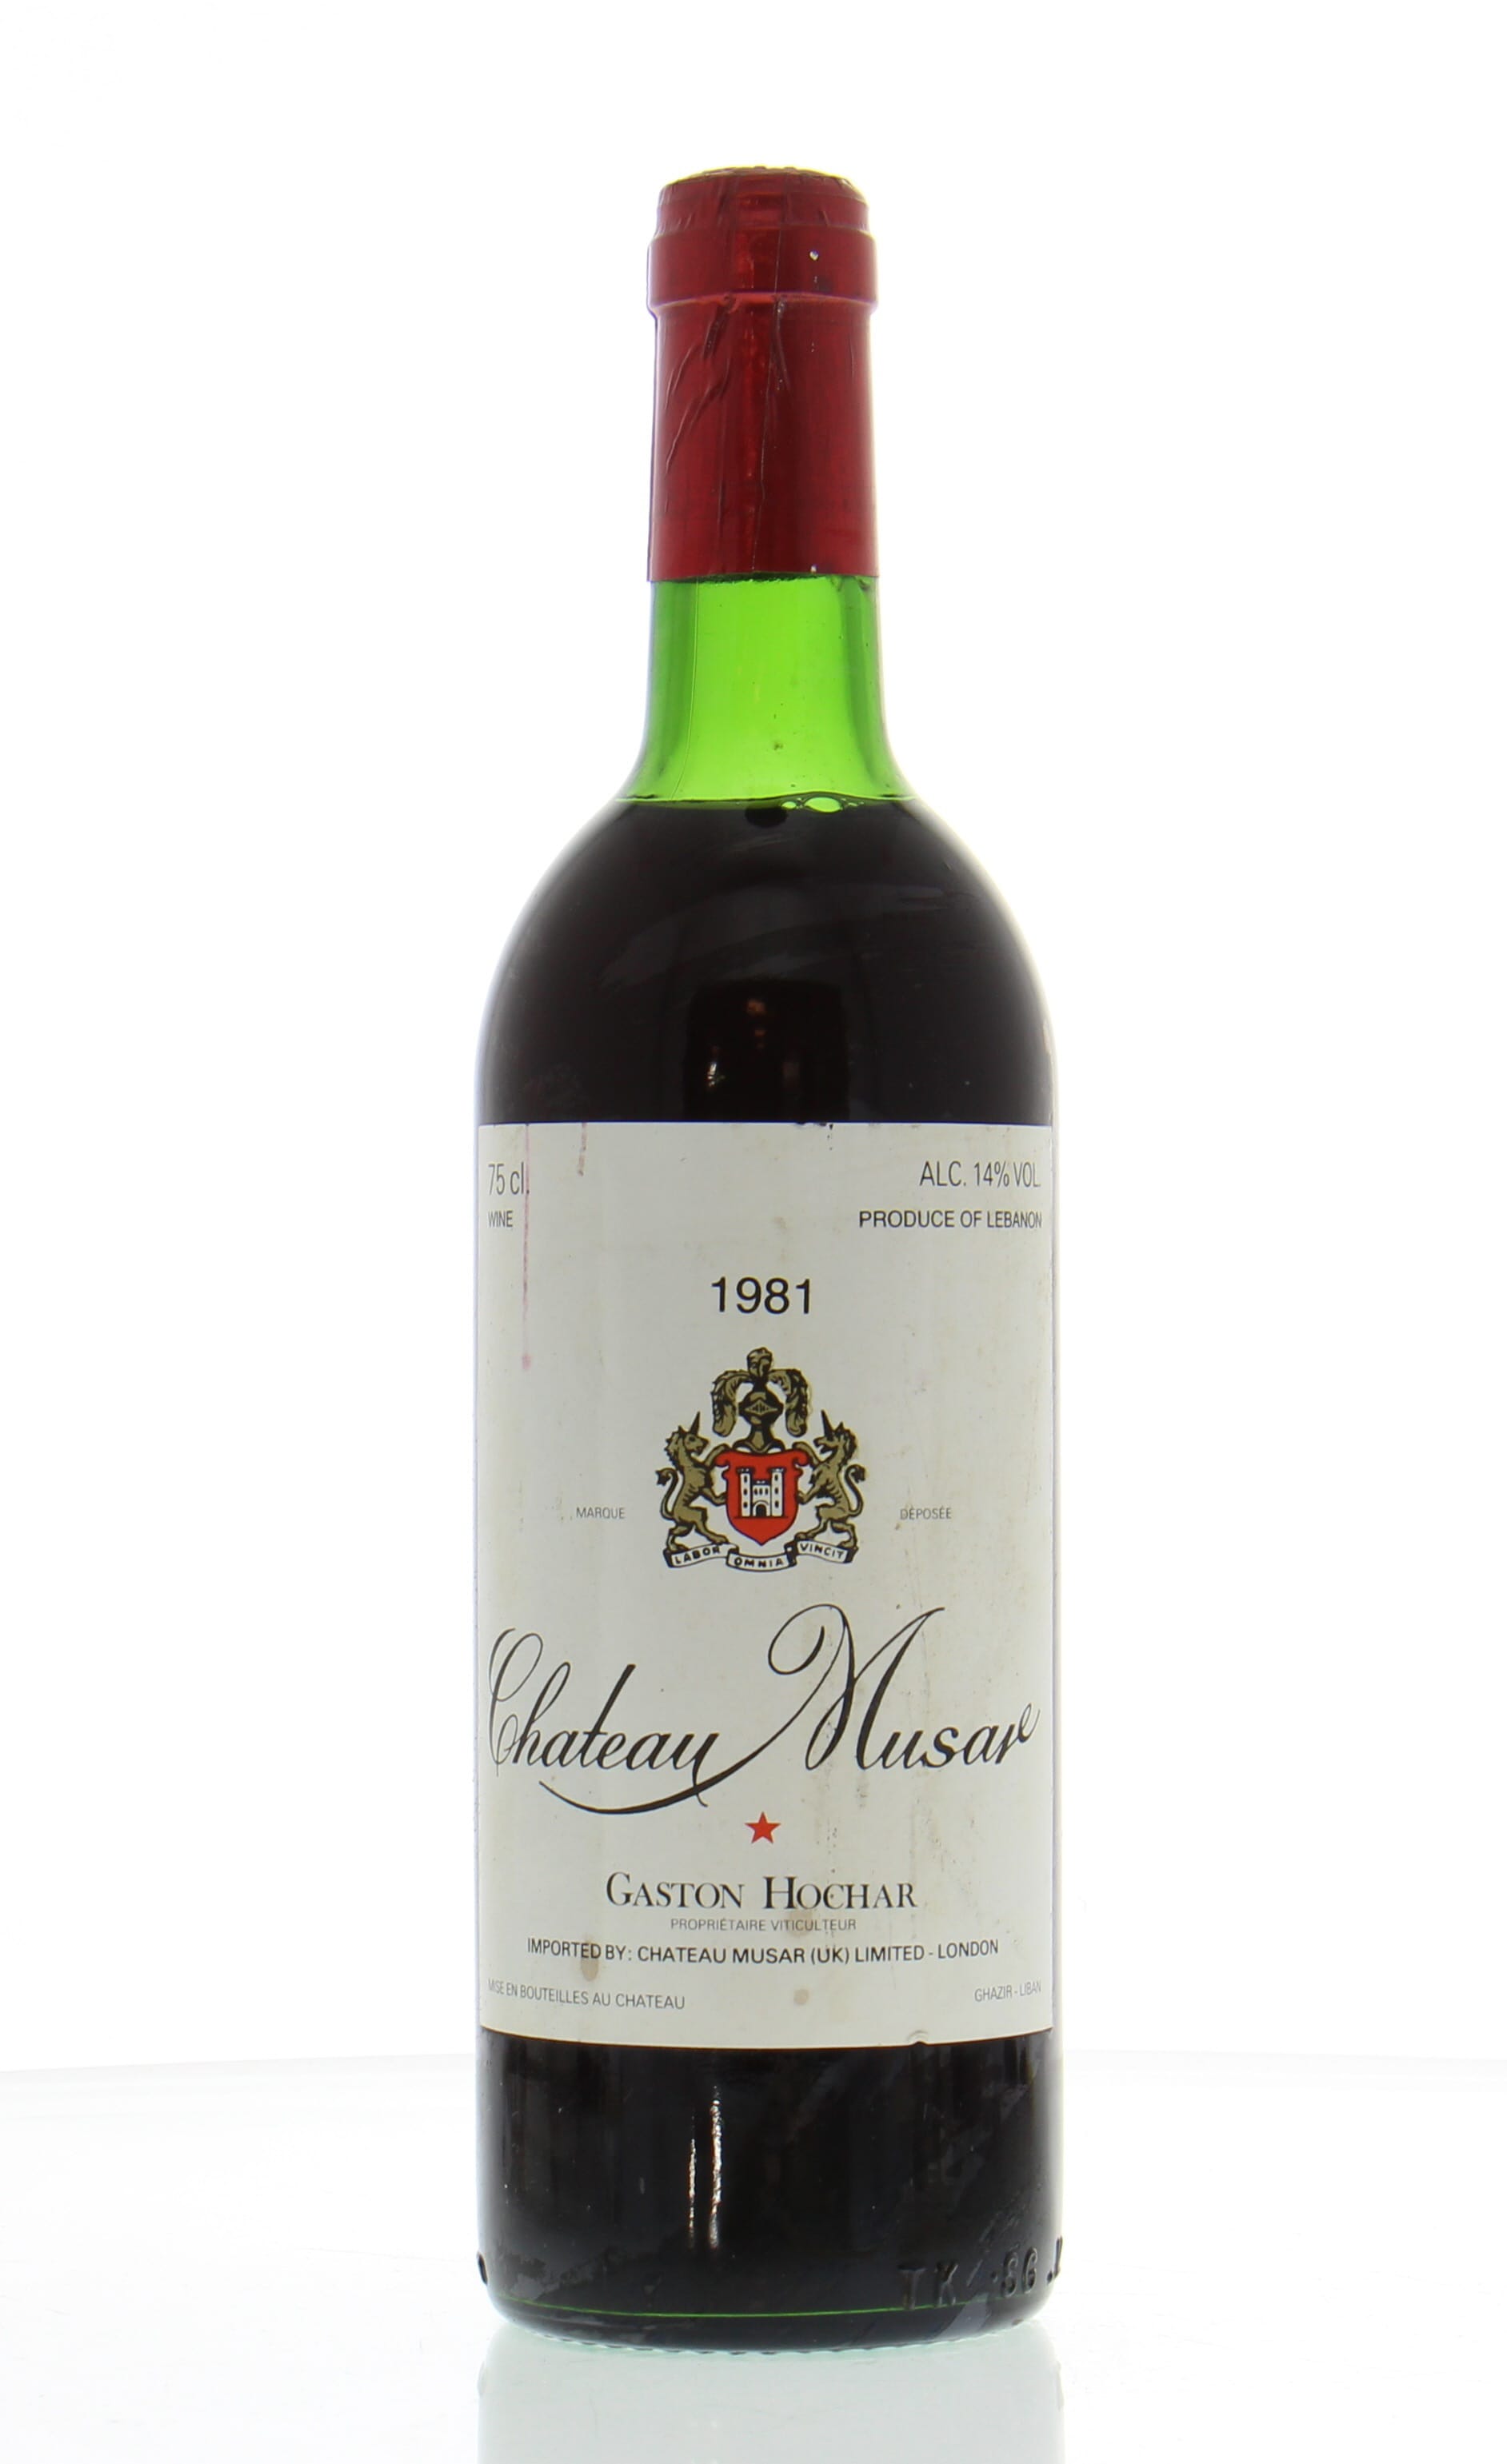 Chateau Musar - Chateau Musar 1981 Top shoulder